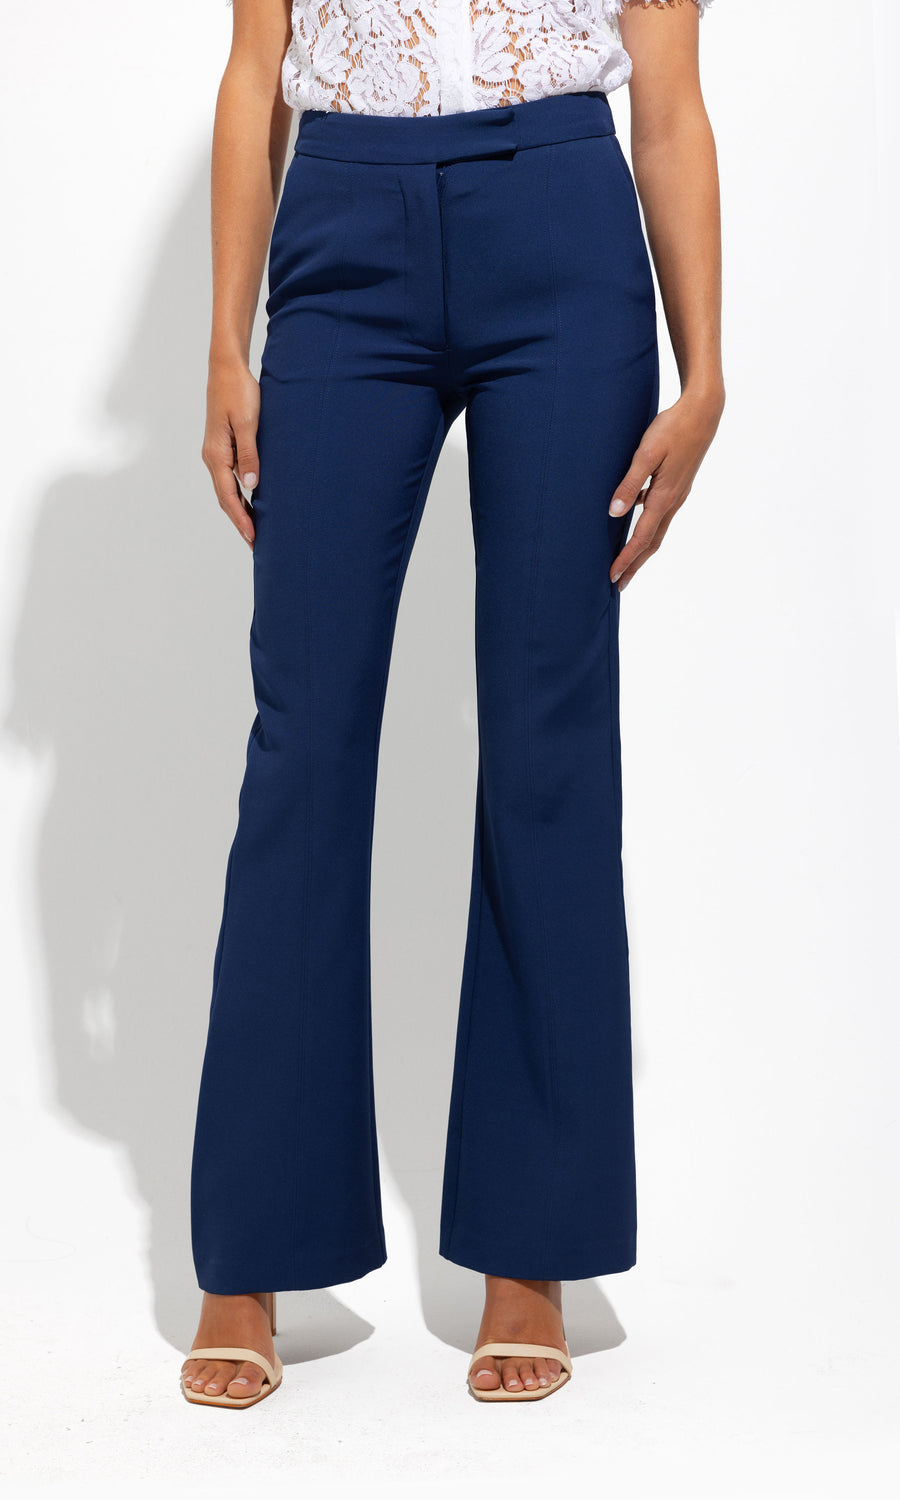 Lucca Crepe Pants - Navy